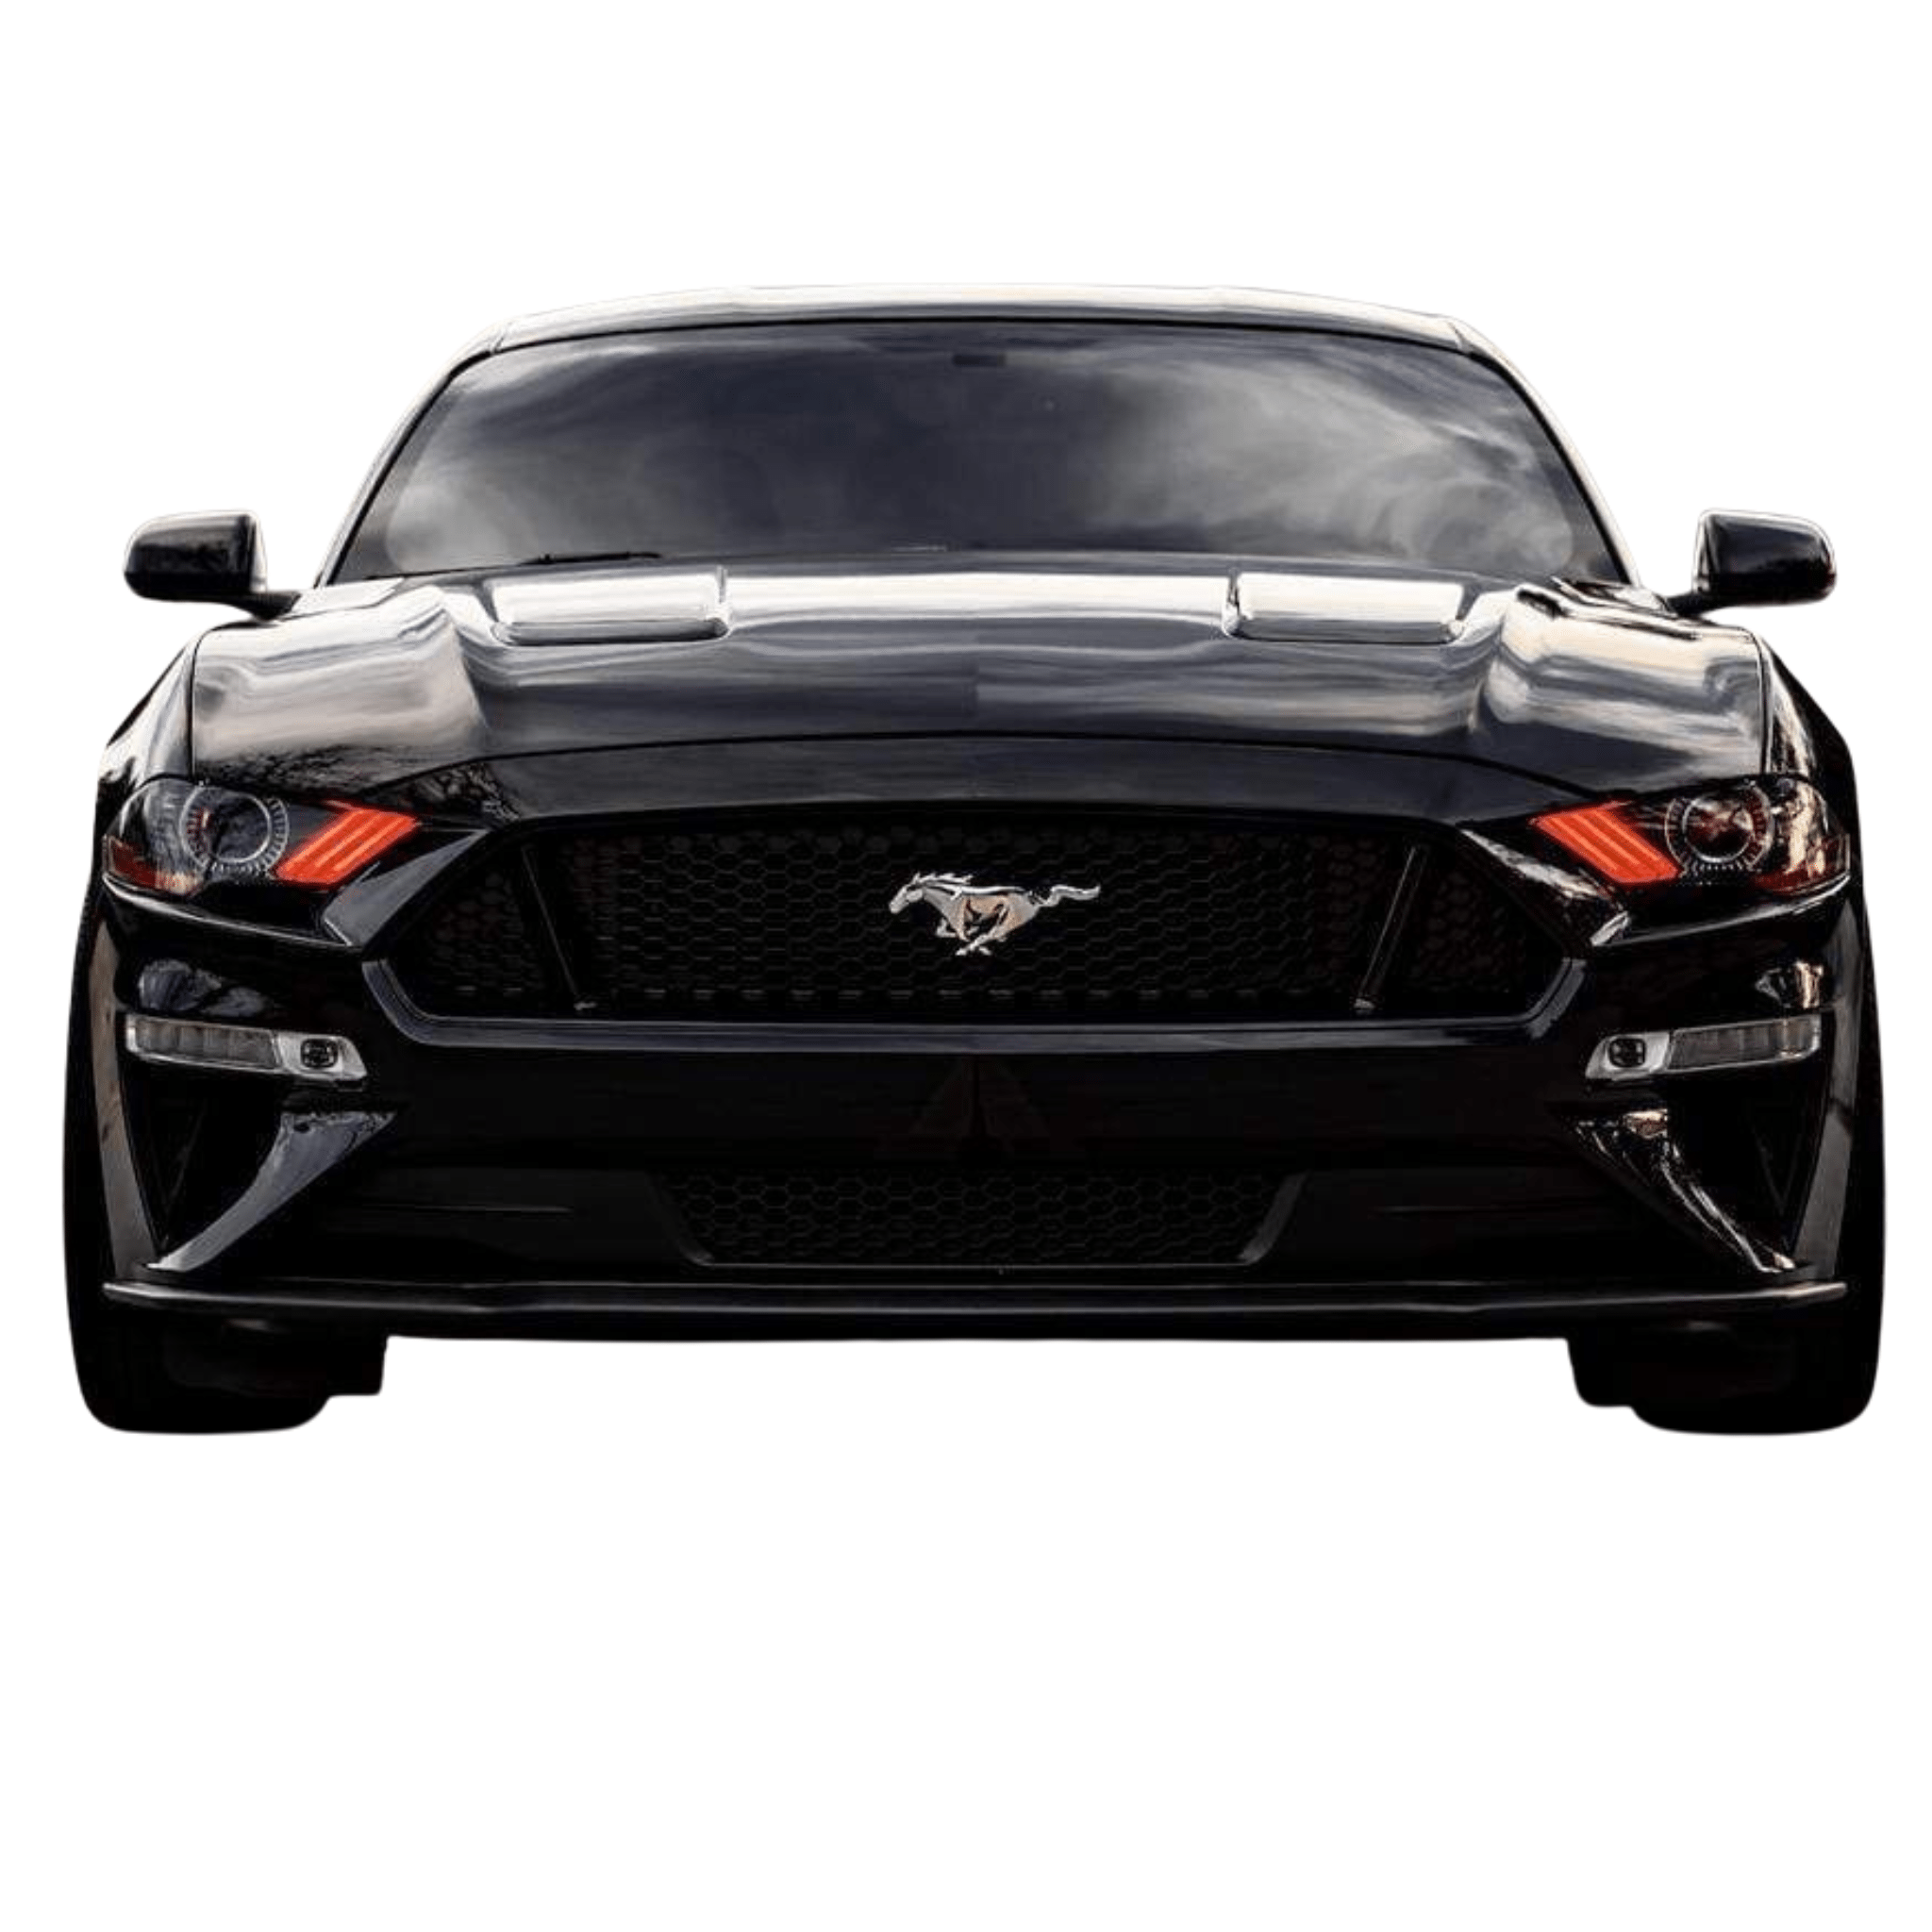 2018-2023 Ford Mustang Multicolor DRL Boards - RGB Halo Kits Multicolor Flow Series Color Chasing RGBWA LED headlight kit Oracle Lighting Trendz OneUpLighting Morimoto theretrofitsource AutoLEDTech Diode Dynamics